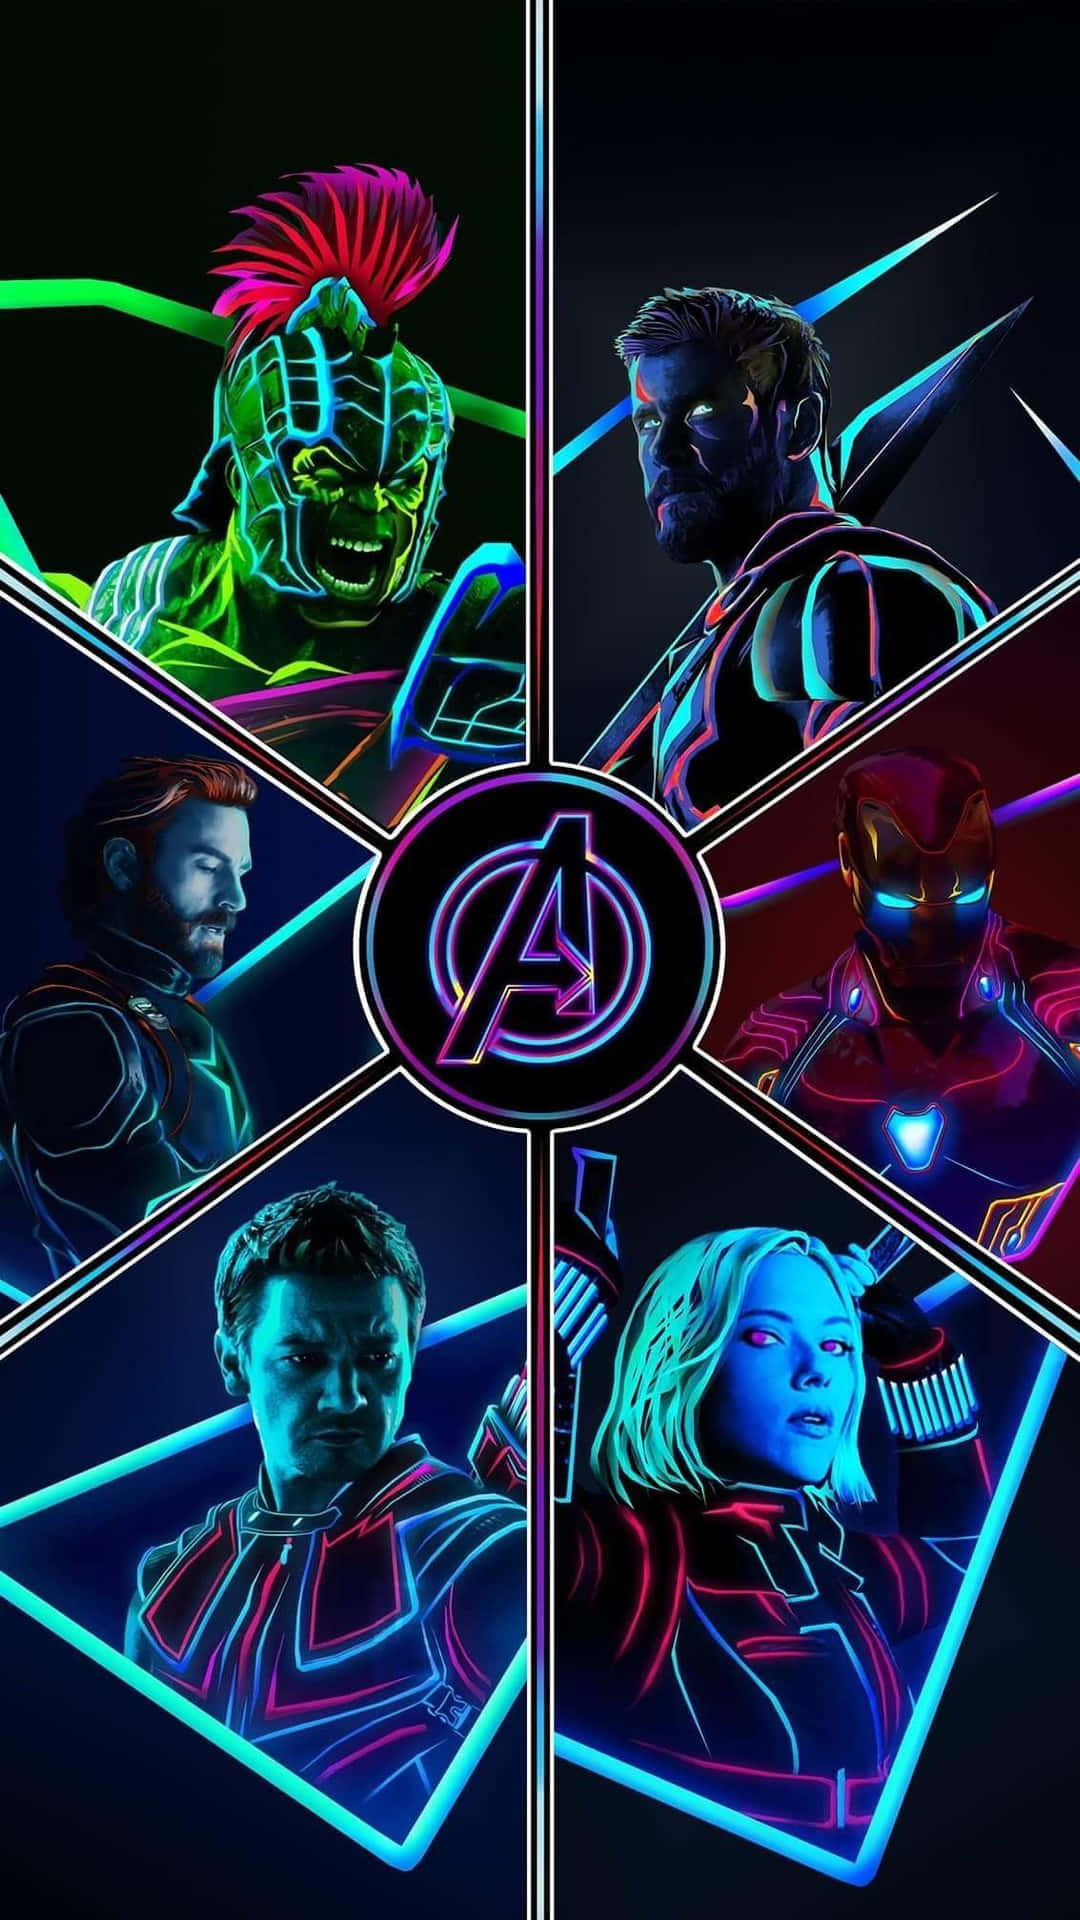 Show your true colors and pledge your allegiance in style with the Avengers Endgame Iphone Wallpaper